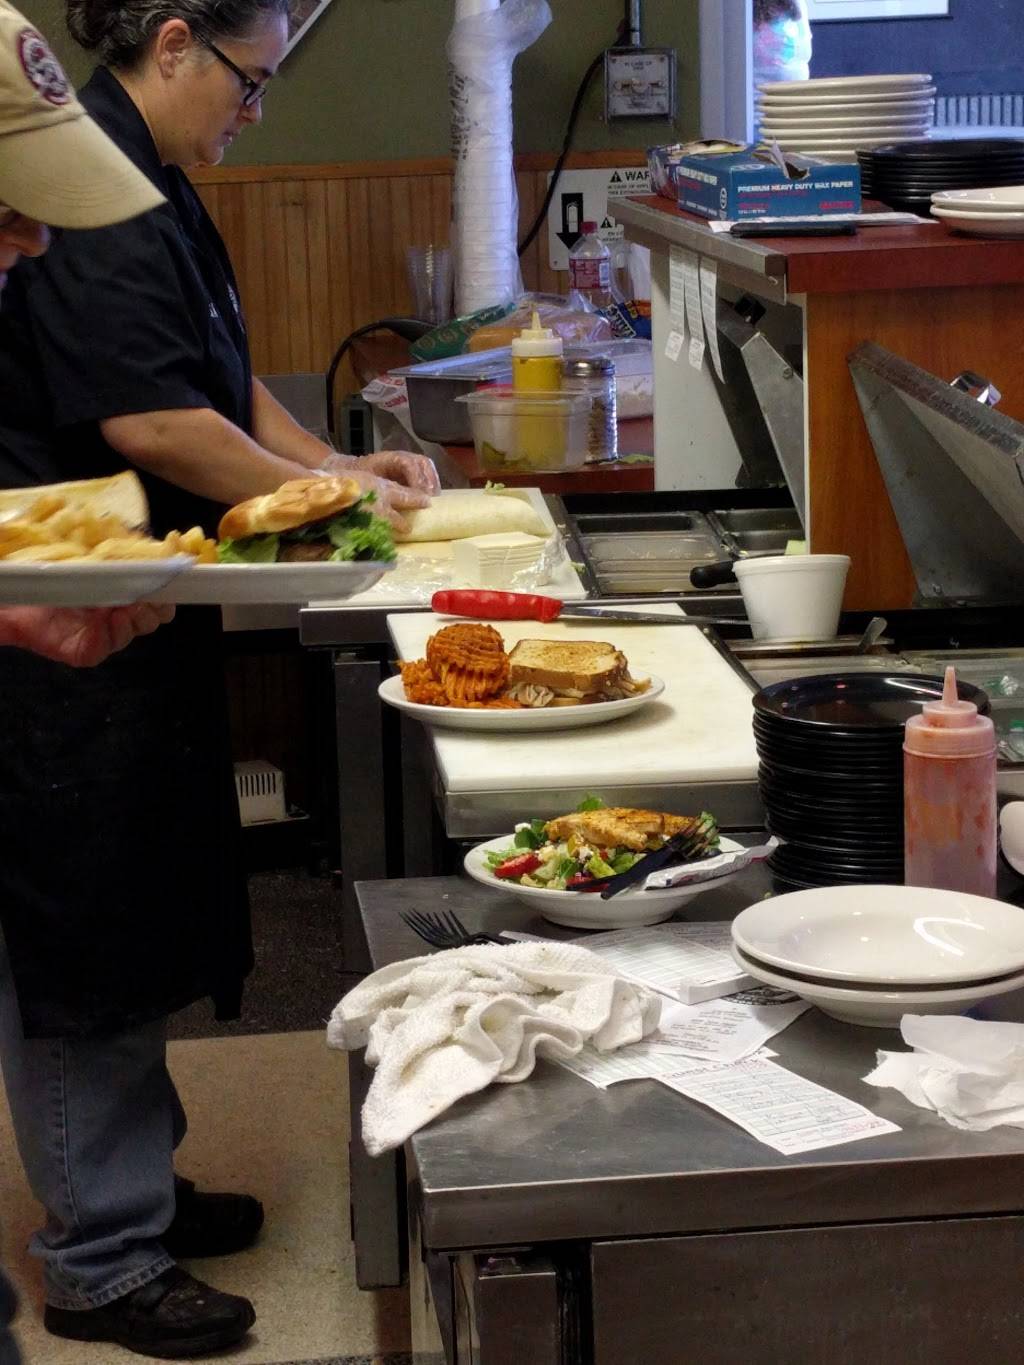 9th Ave Cafe & Catering | 3101 9th Ave Dr NW, Hickory, NC 28601 | Phone: (828) 324-7800